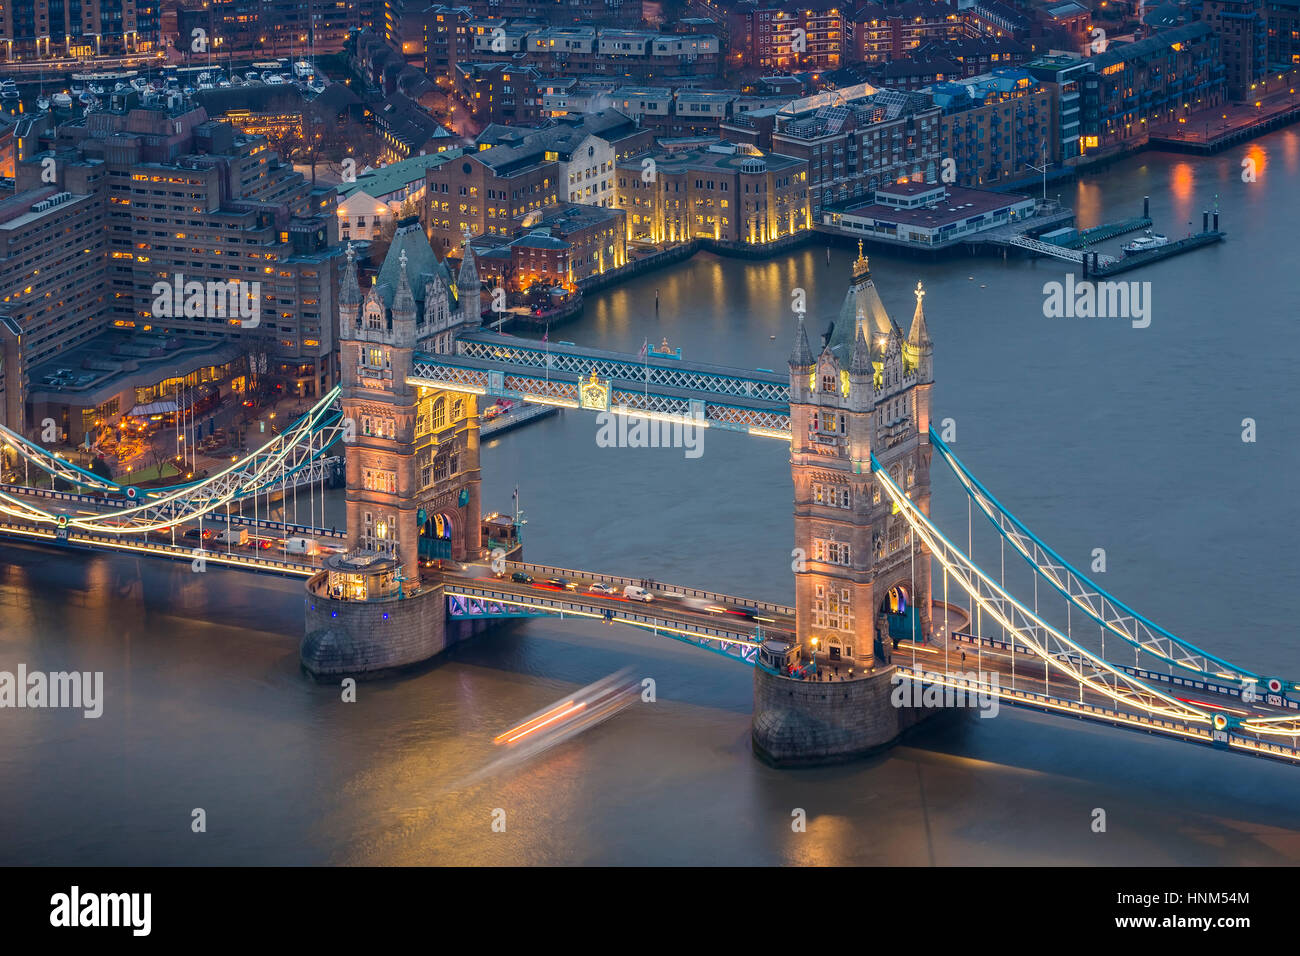 London, England - Aerial view of the world famous Tower Bridge by night Stock Photo